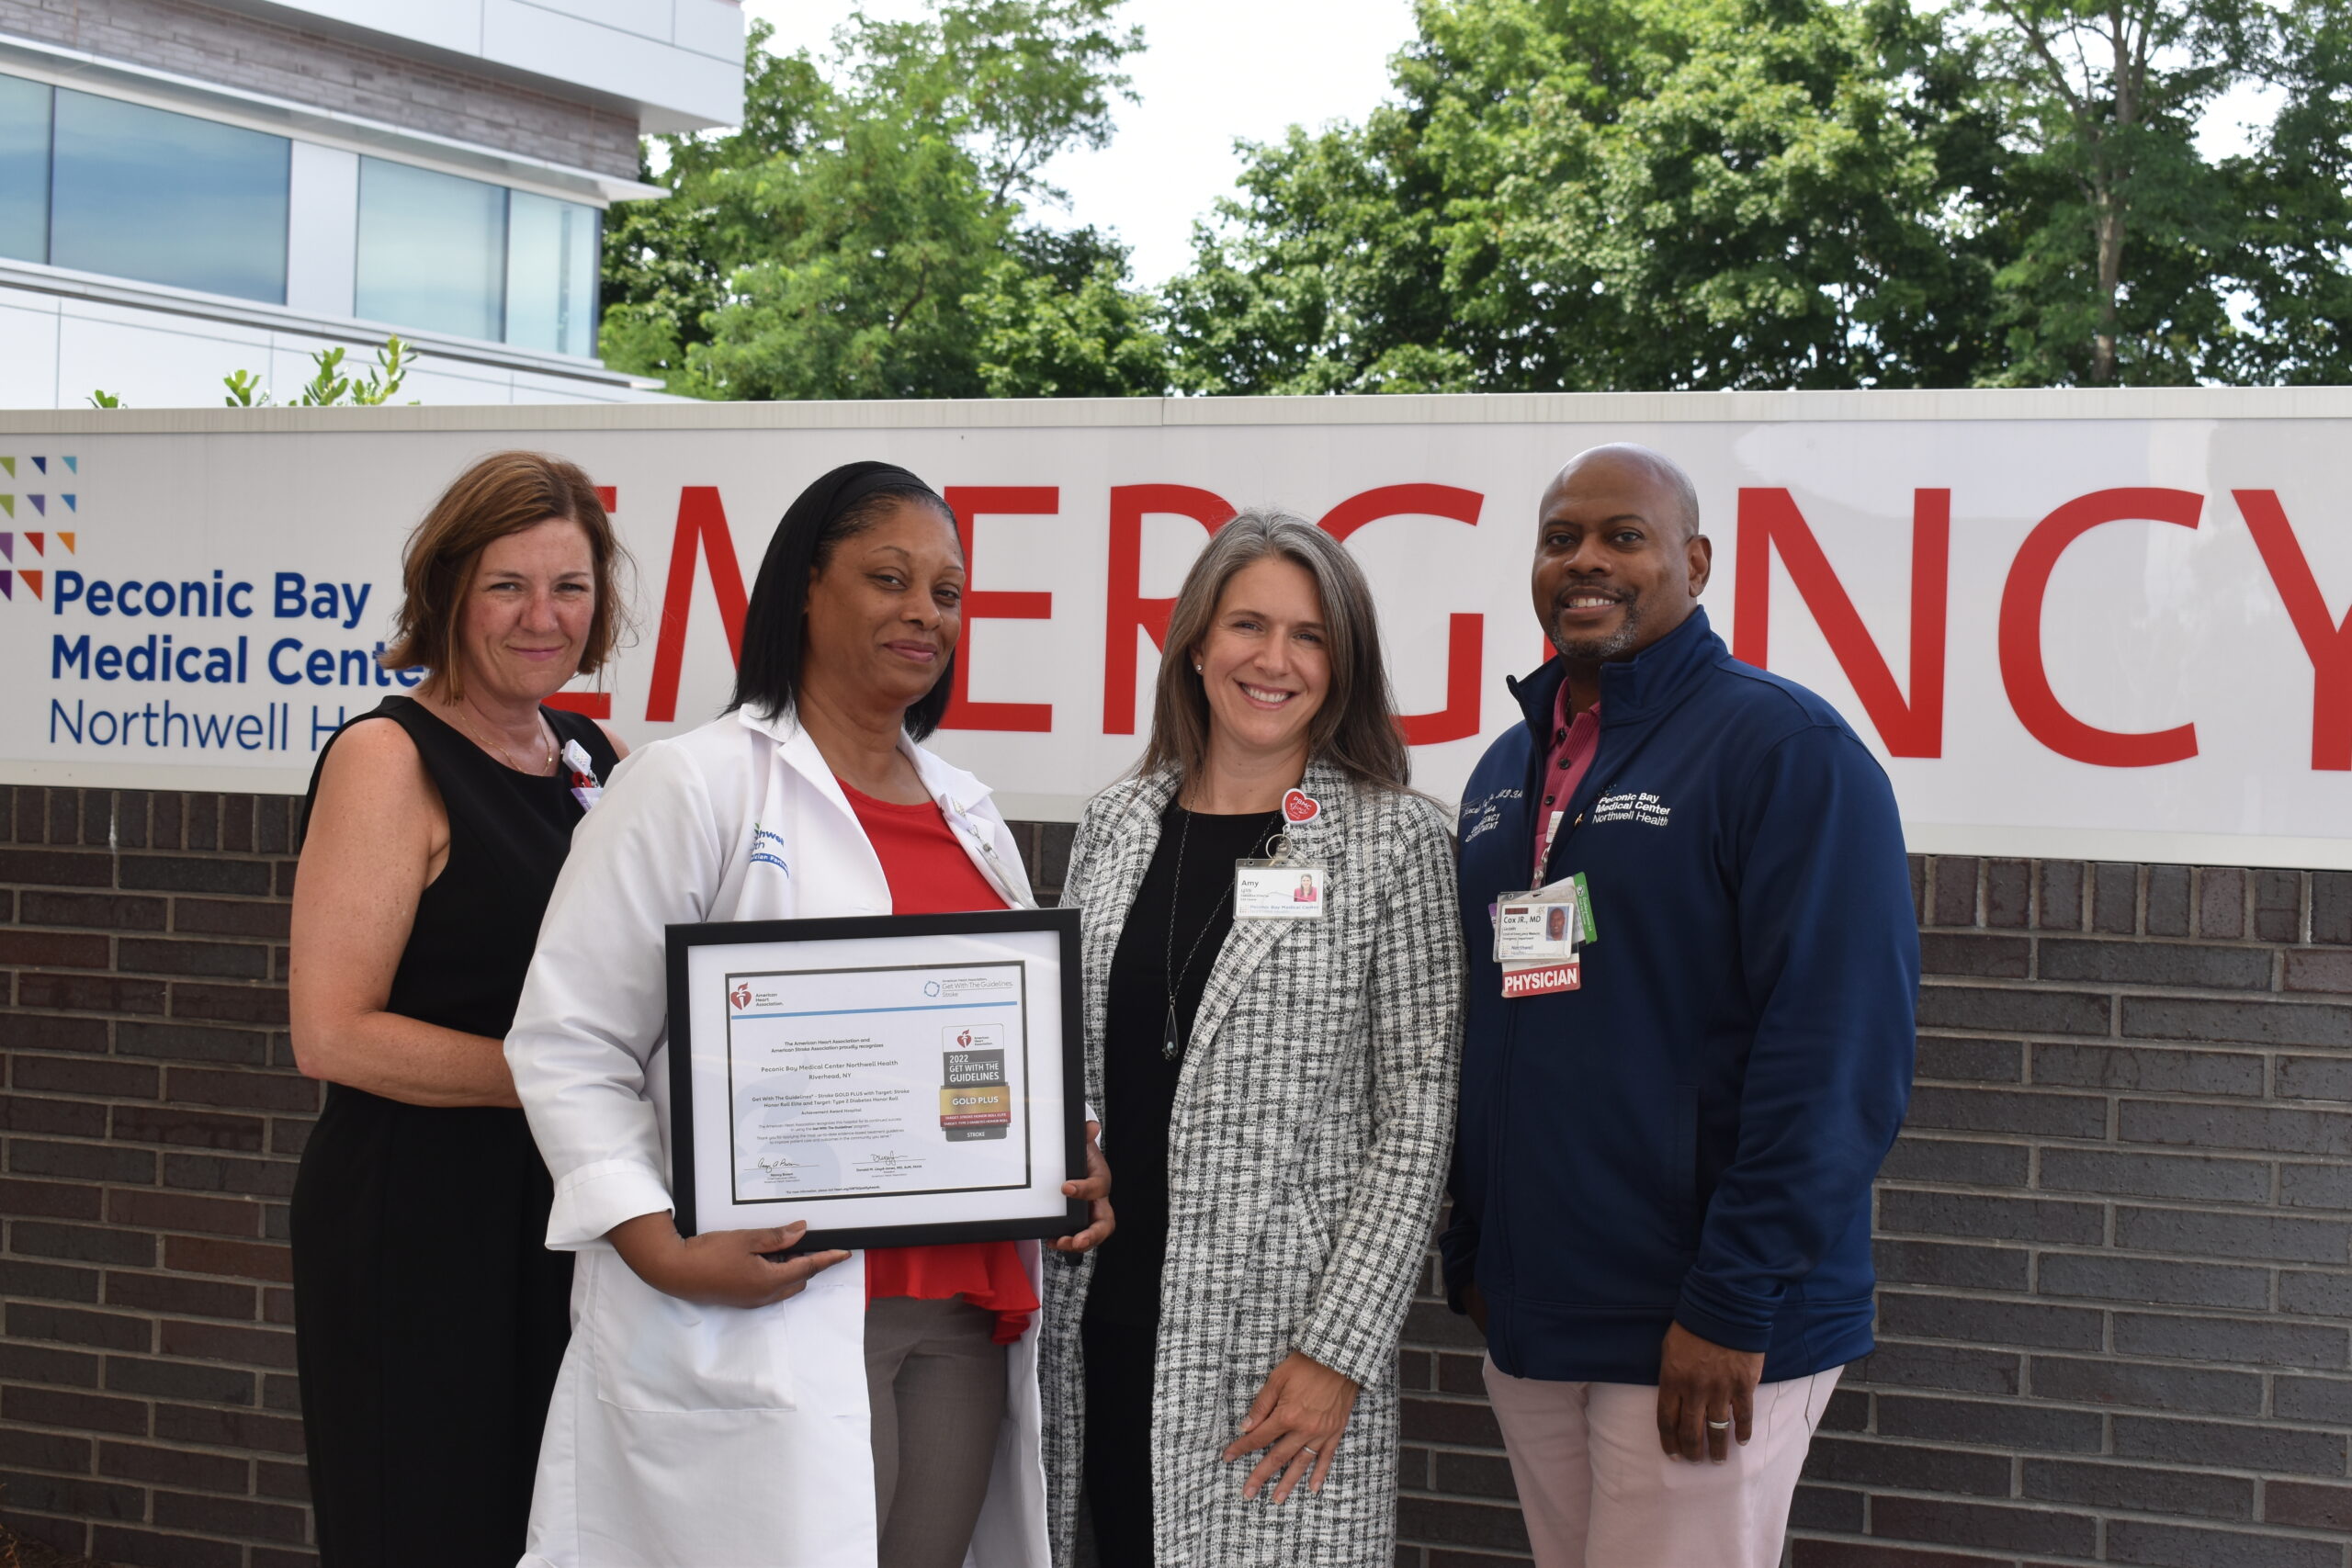 Peconic Bay Medical Center staff, from left,  MaryJo Stark, RN, Director, Patient Care, Emergency Service,; Donna Lyburt, MSN, RN, clinical program manager, stroke; Dr. Amy E. Loeb, executive director; Dr. Lincoln Cox, chair, Emergency Medicine. COURTESY PECONIC BAY MEDICAL CENTER